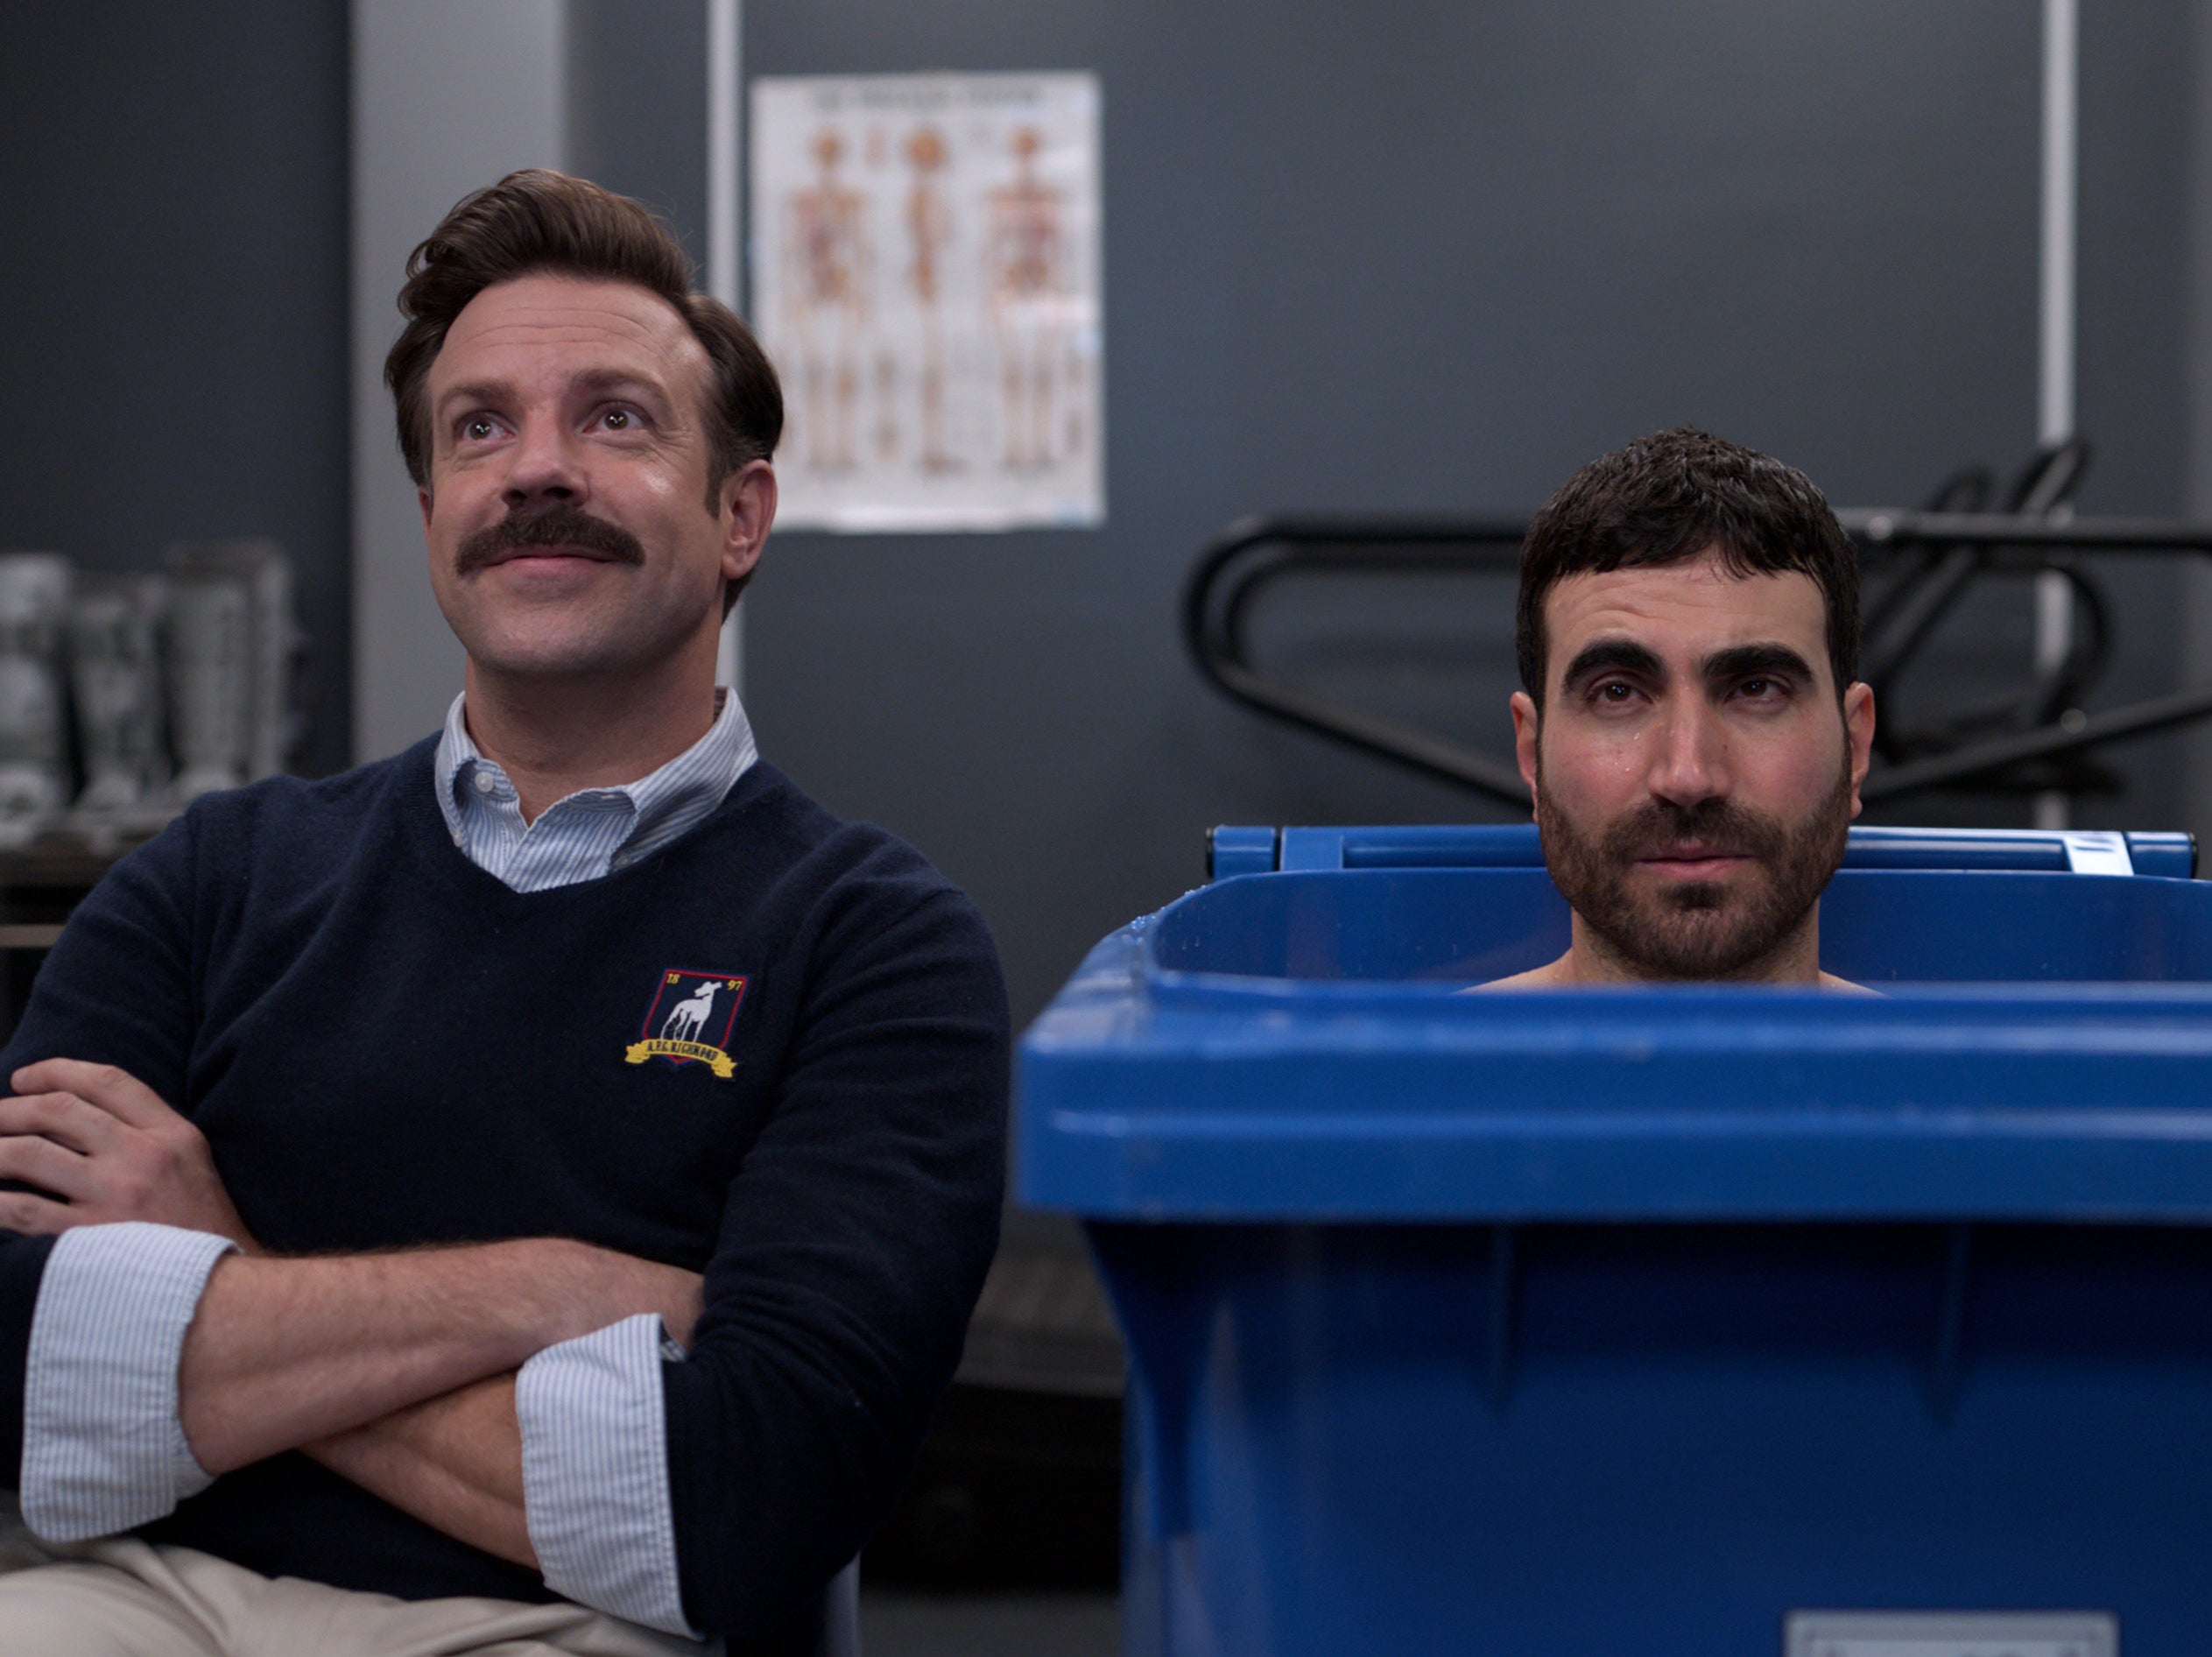 ‘They couldn’t be bothered to look for anybody else so I got the part’: Brett Goldstein on convincing Jason Sudeikis to cast him in ‘Ted Lasso’